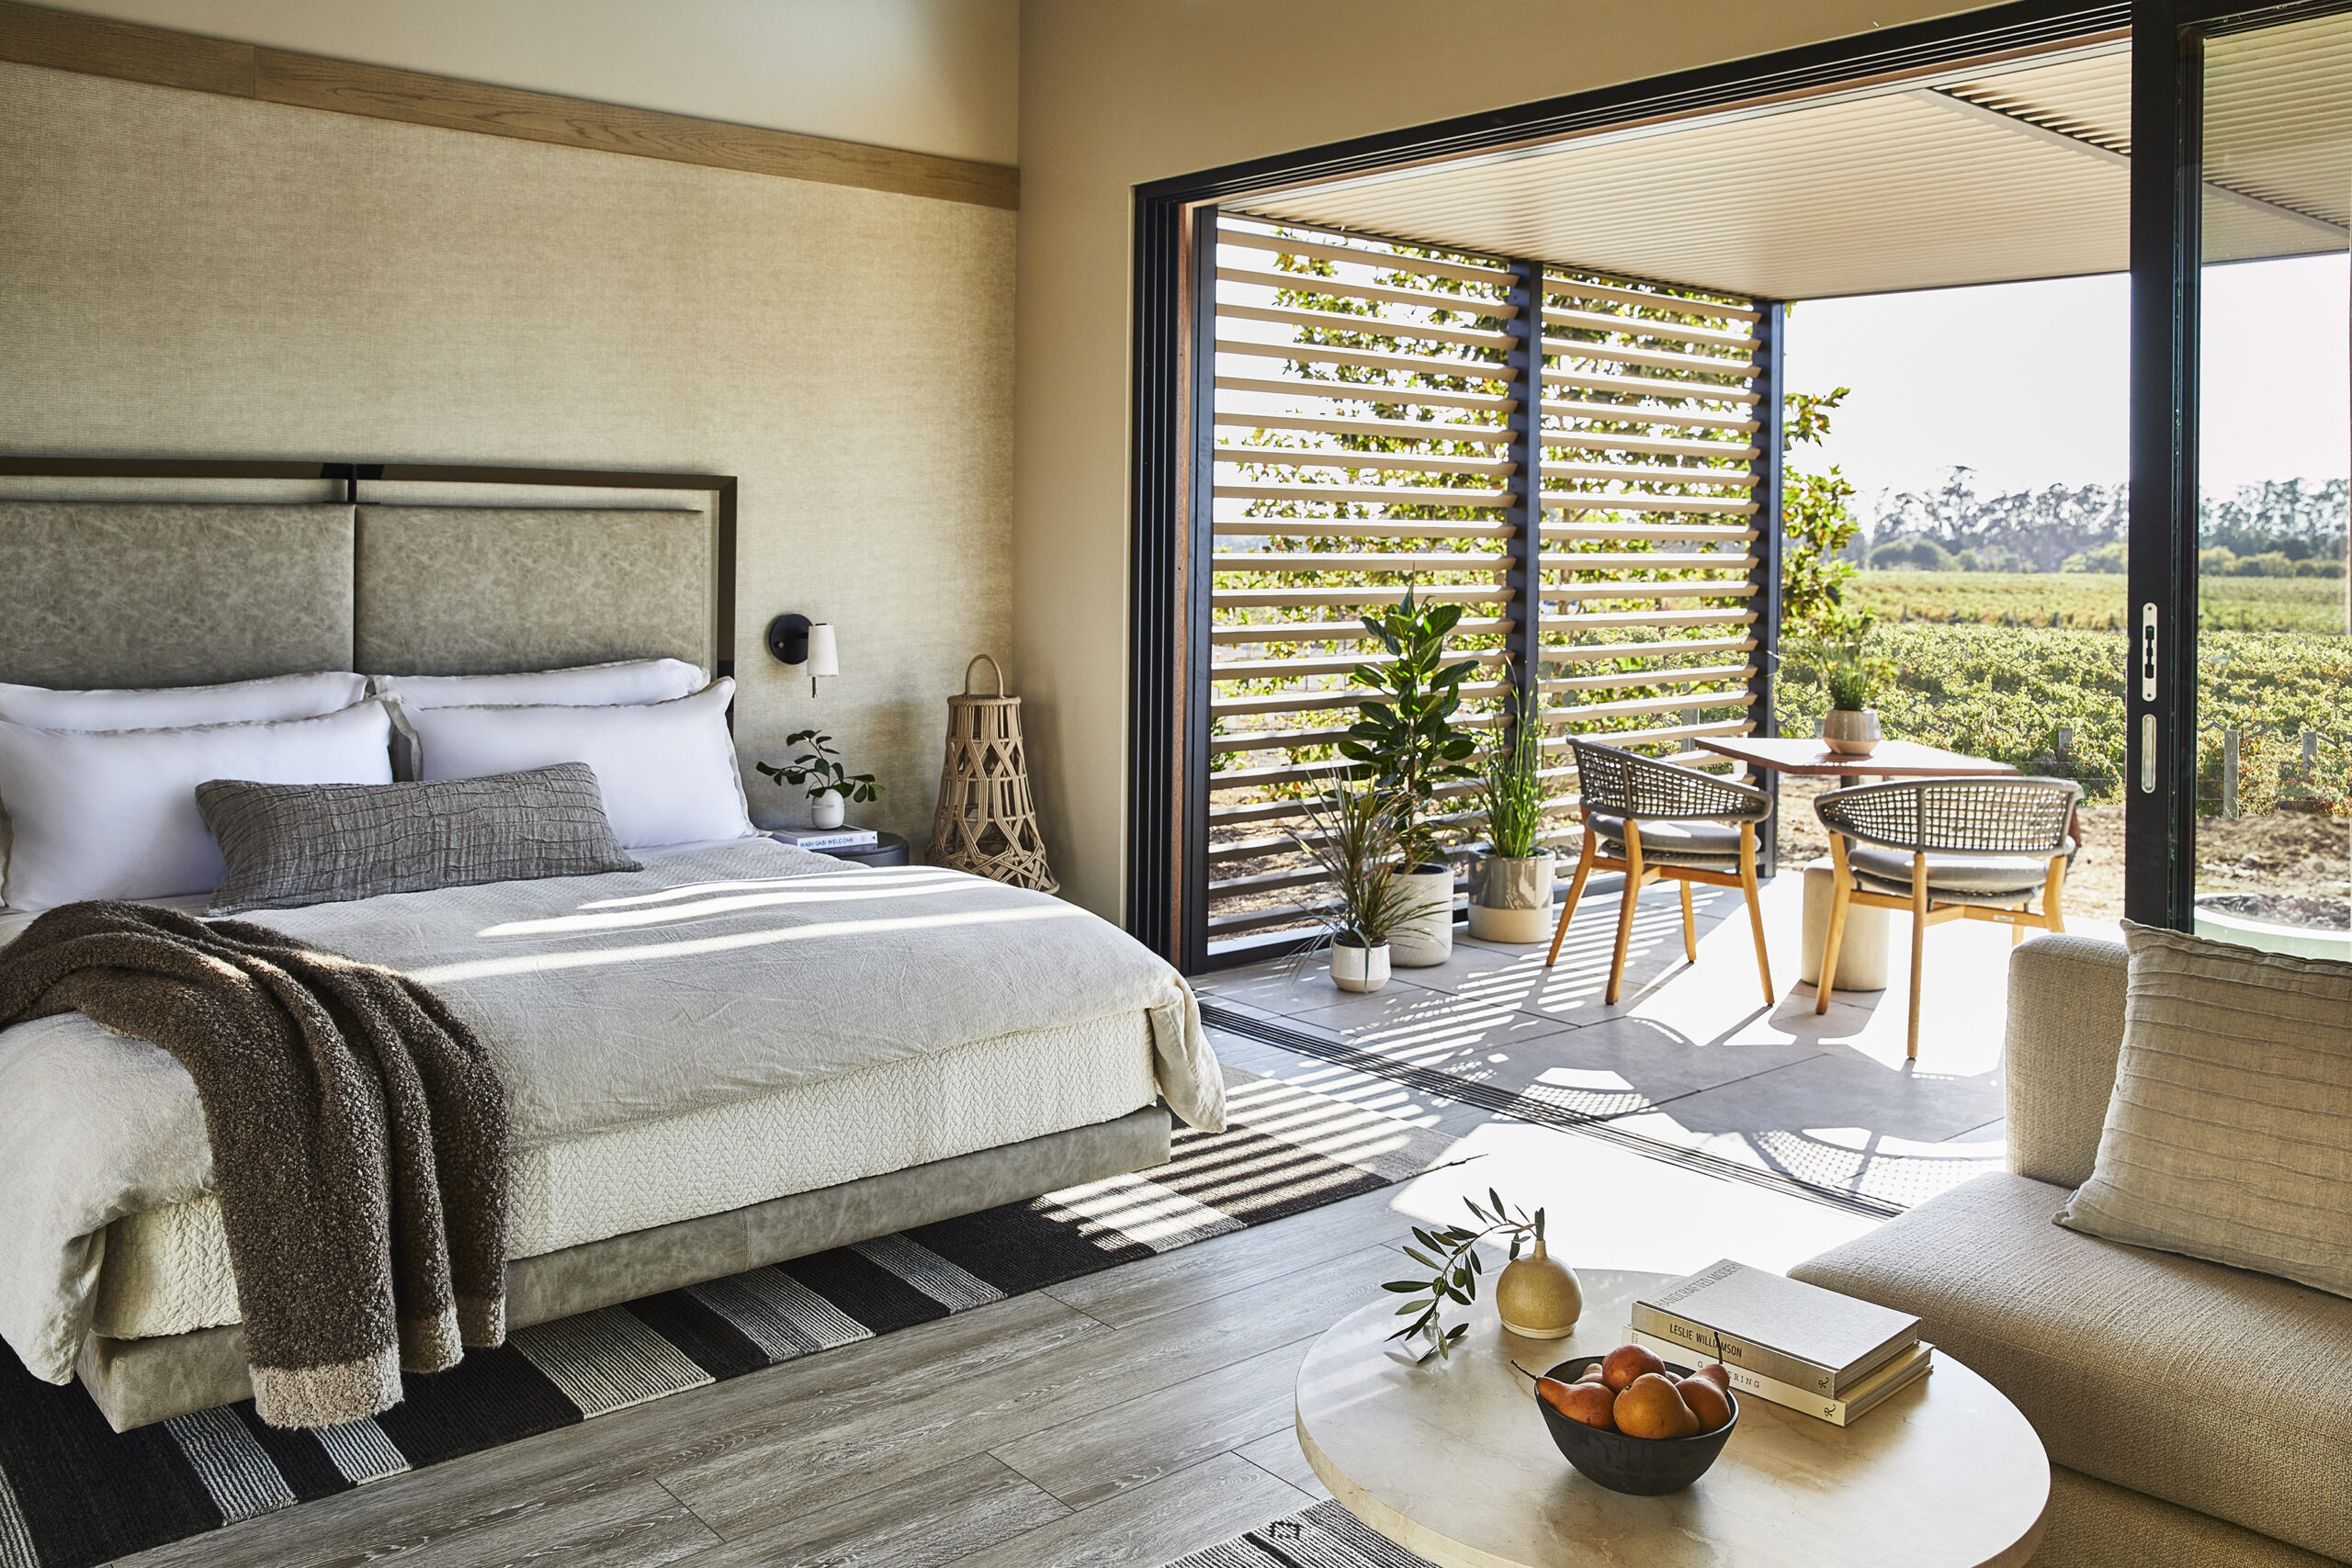 Guest room at Stanly Ranch in Napa. (Courtesy of Auberge Resorts Collection)